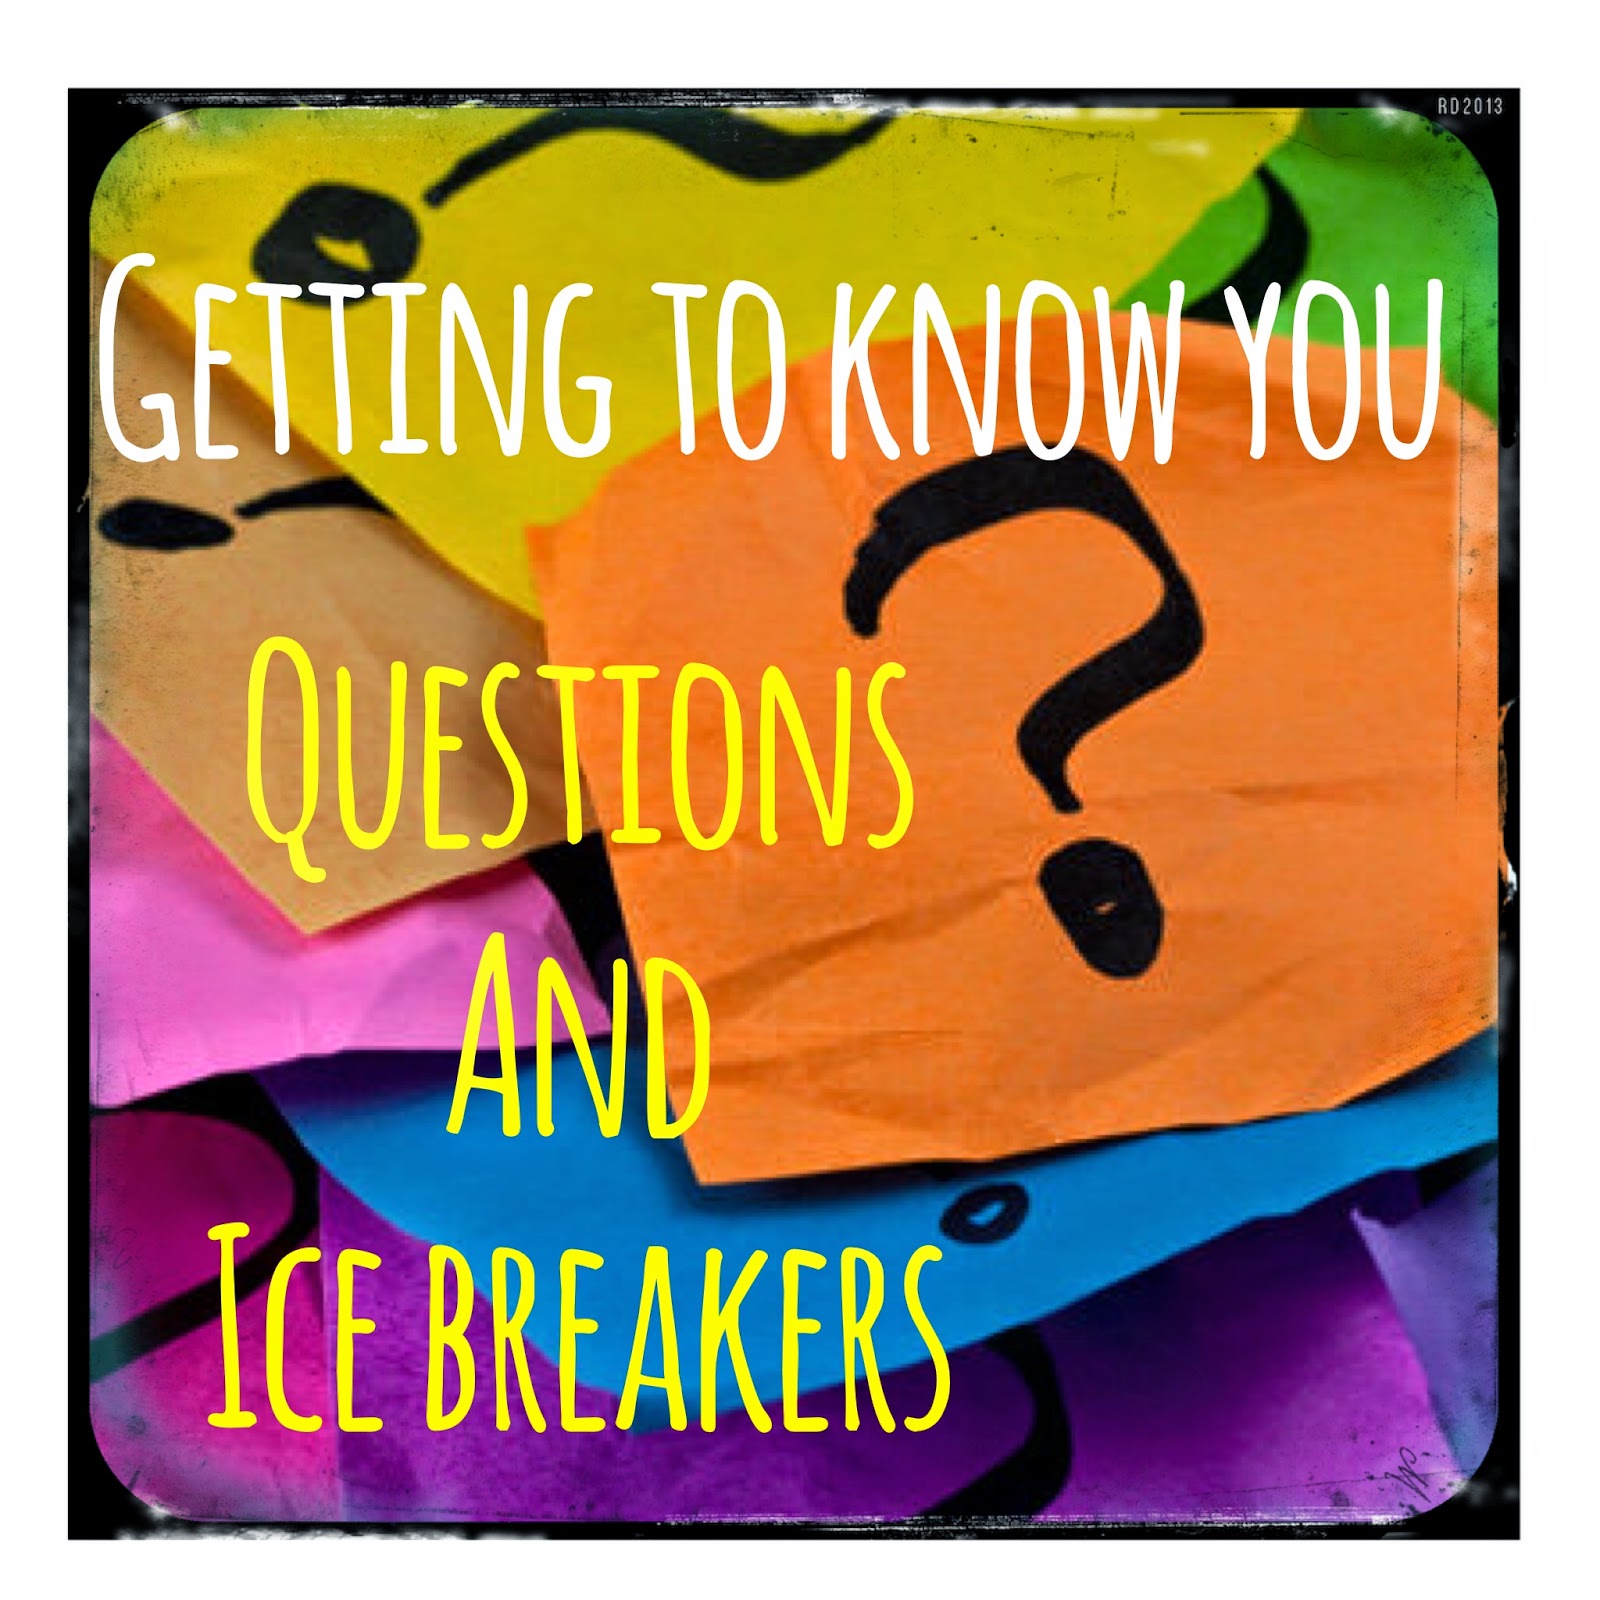 Getting To Know You Questions and Icebreakers – Counseling Essentials